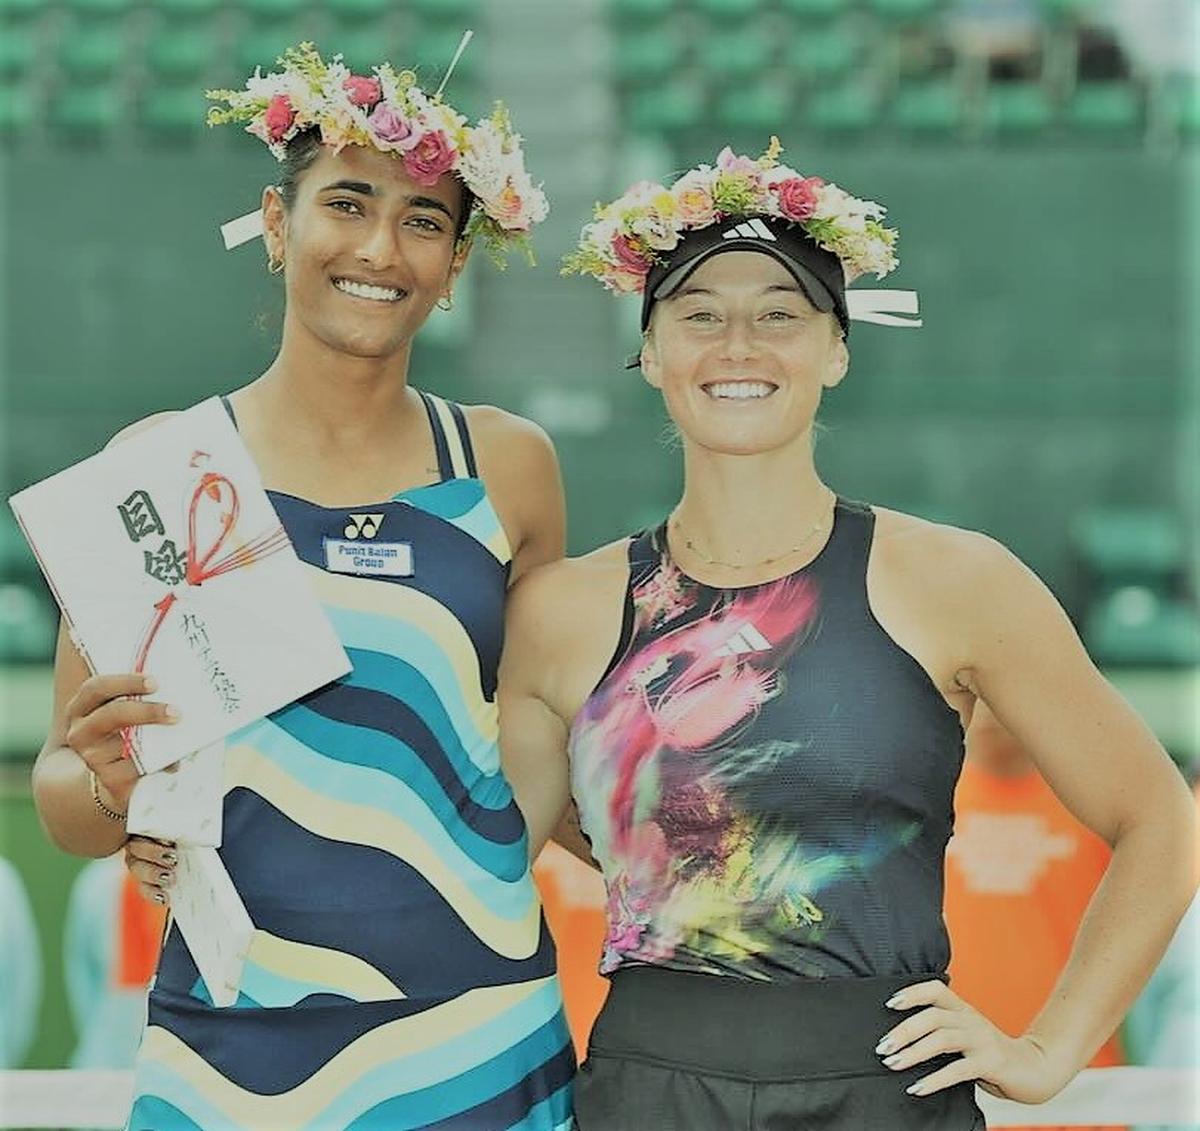 Rutuja Bhosale and Paige Hourigan, the doubles champions in
the ITF women’s tennis event in Japan.